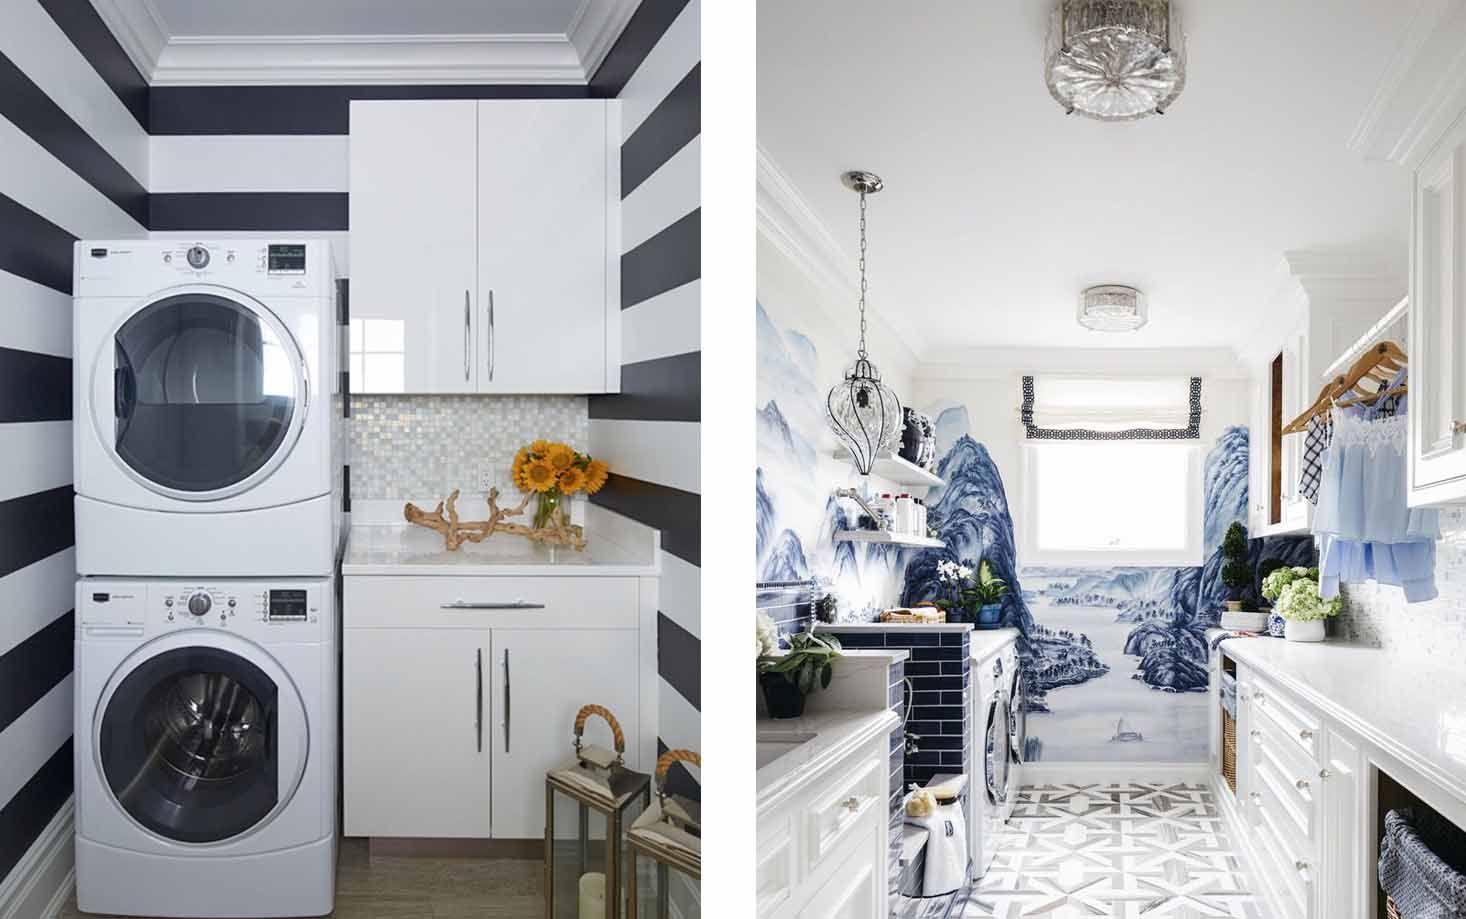 15 Beautiful Small Laundry Room Ideas - Best Laundry Room Designs ...